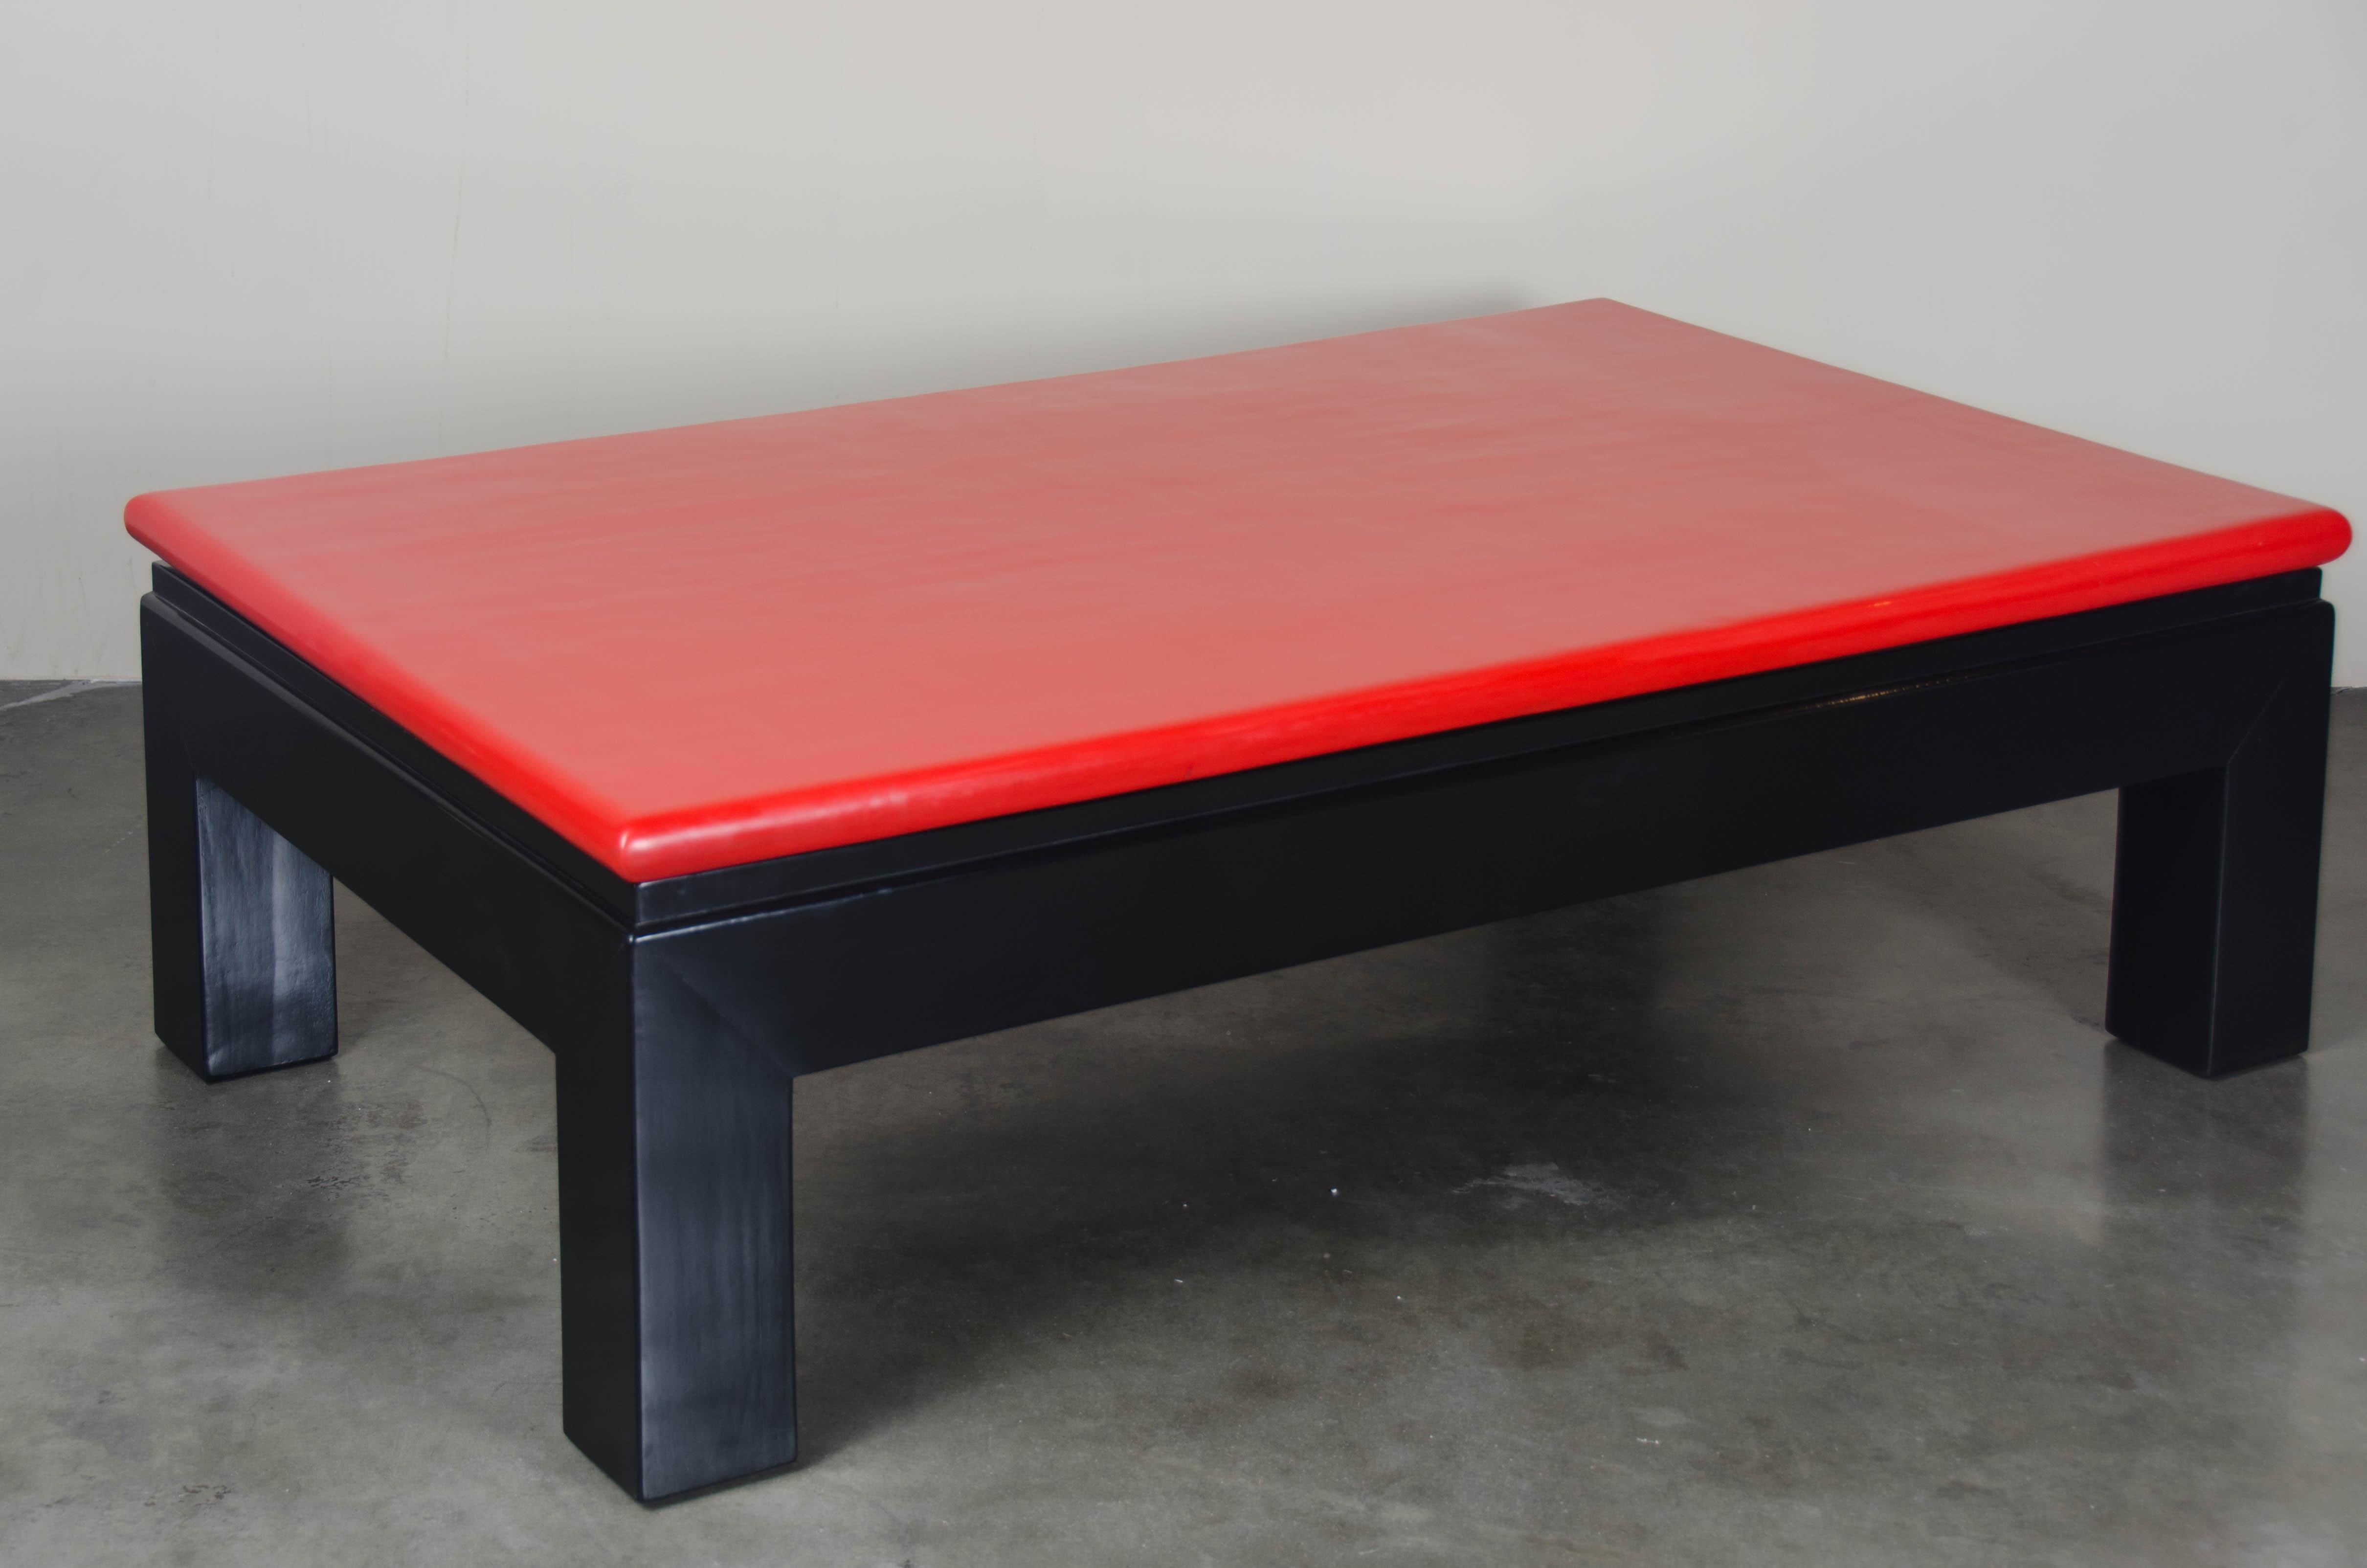 Ming Coffee Table, Red Lacquer by Robert Kuo, Handmade, Limited Edition In New Condition For Sale In Los Angeles, CA